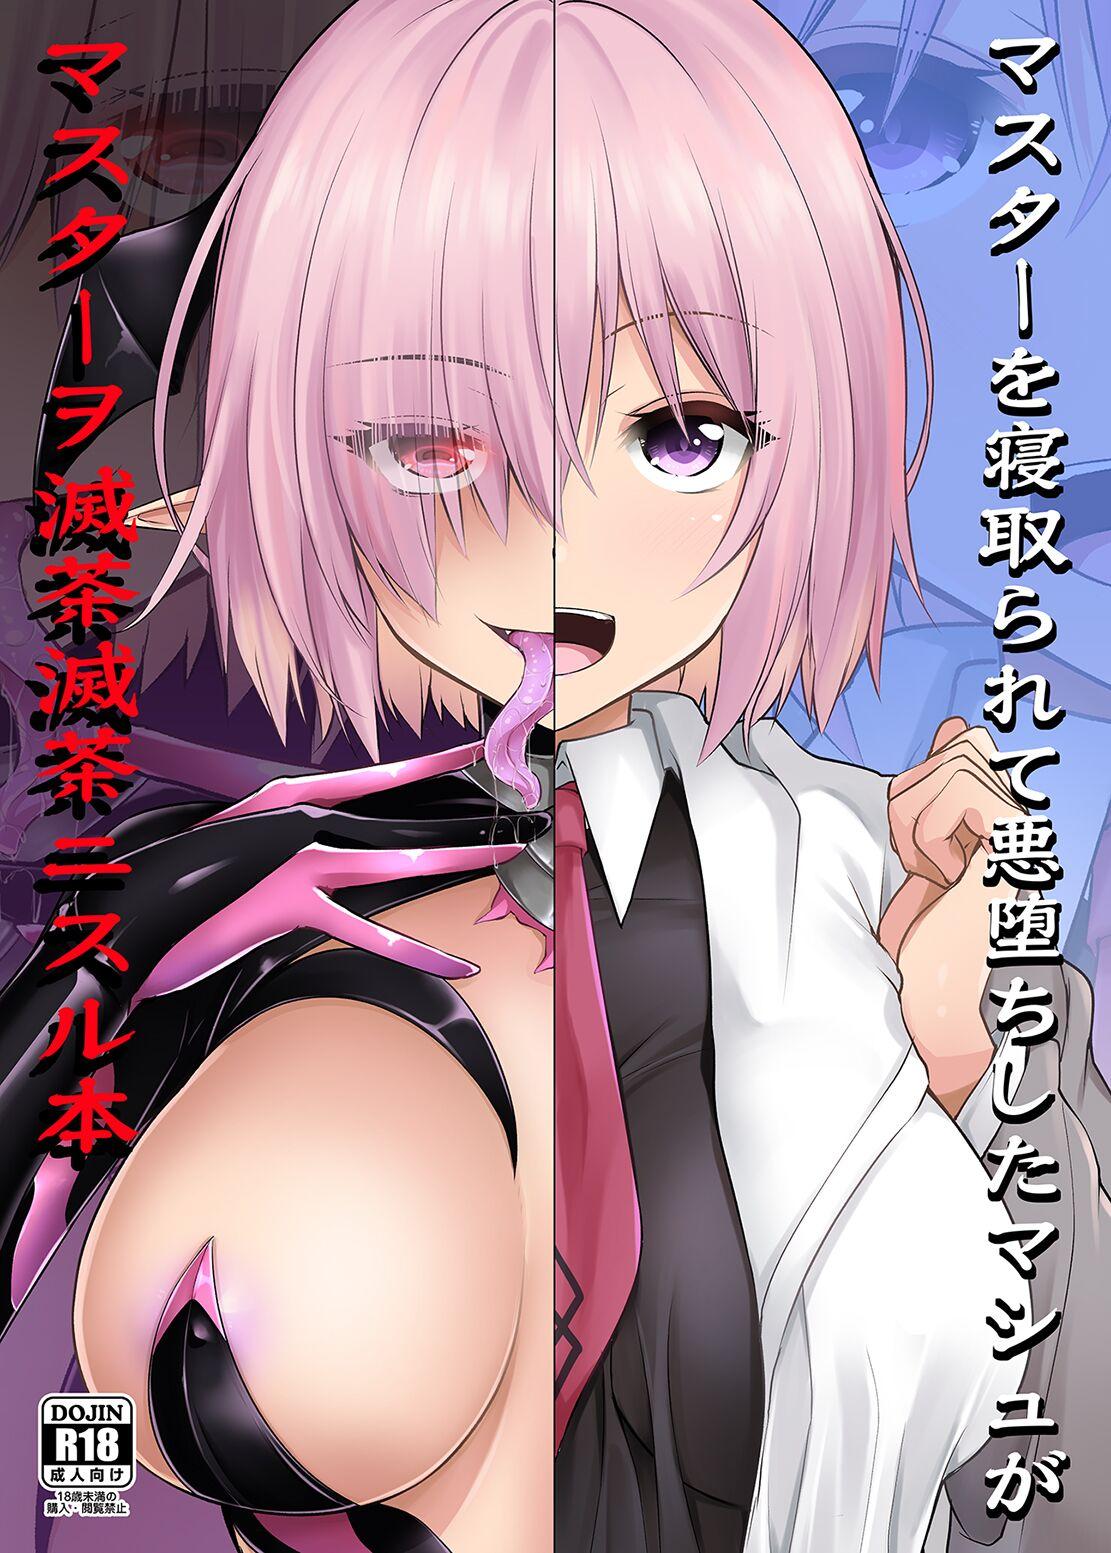 A Book About a Corrupted Mash Recklessly Making Love to Her NTR'd Master 0